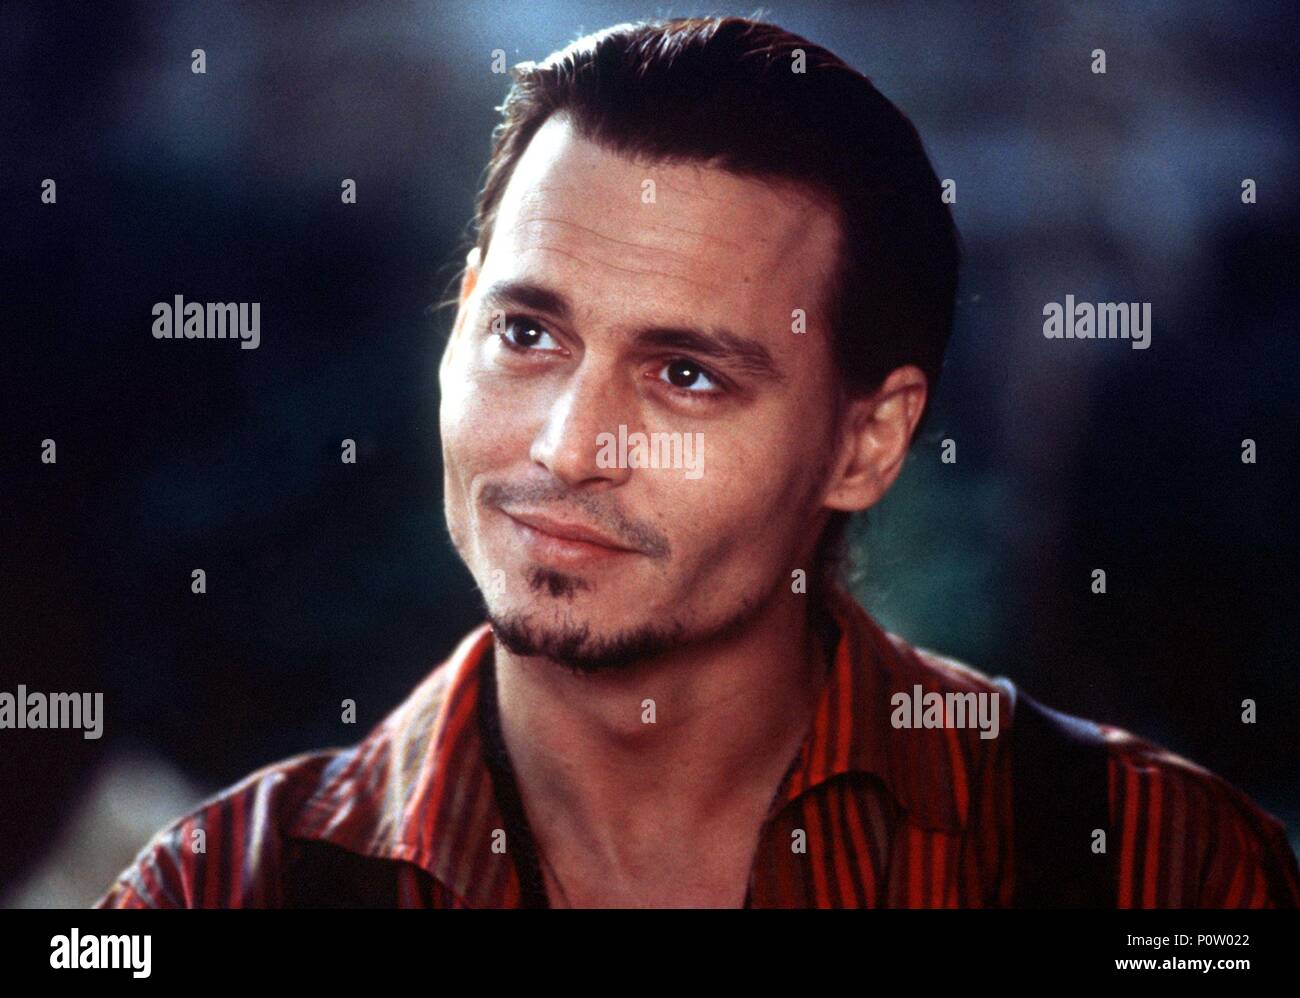 Original Film Title: CHOCOLAT.  English Title: CHOCOLAT.  Film Director: LASSE HALLSTROM.  Year: 2000.  Stars: JOHNNY DEPP. Copyright: Editorial inside use only. This is a publicly distributed handout. Access rights only, no license of copyright provided. Mandatory authorization to Visual Icon (www.visual-icon.com) is required for the reproduction of this image. Credit: MIRAMAX FILMS / Album Stock Photo